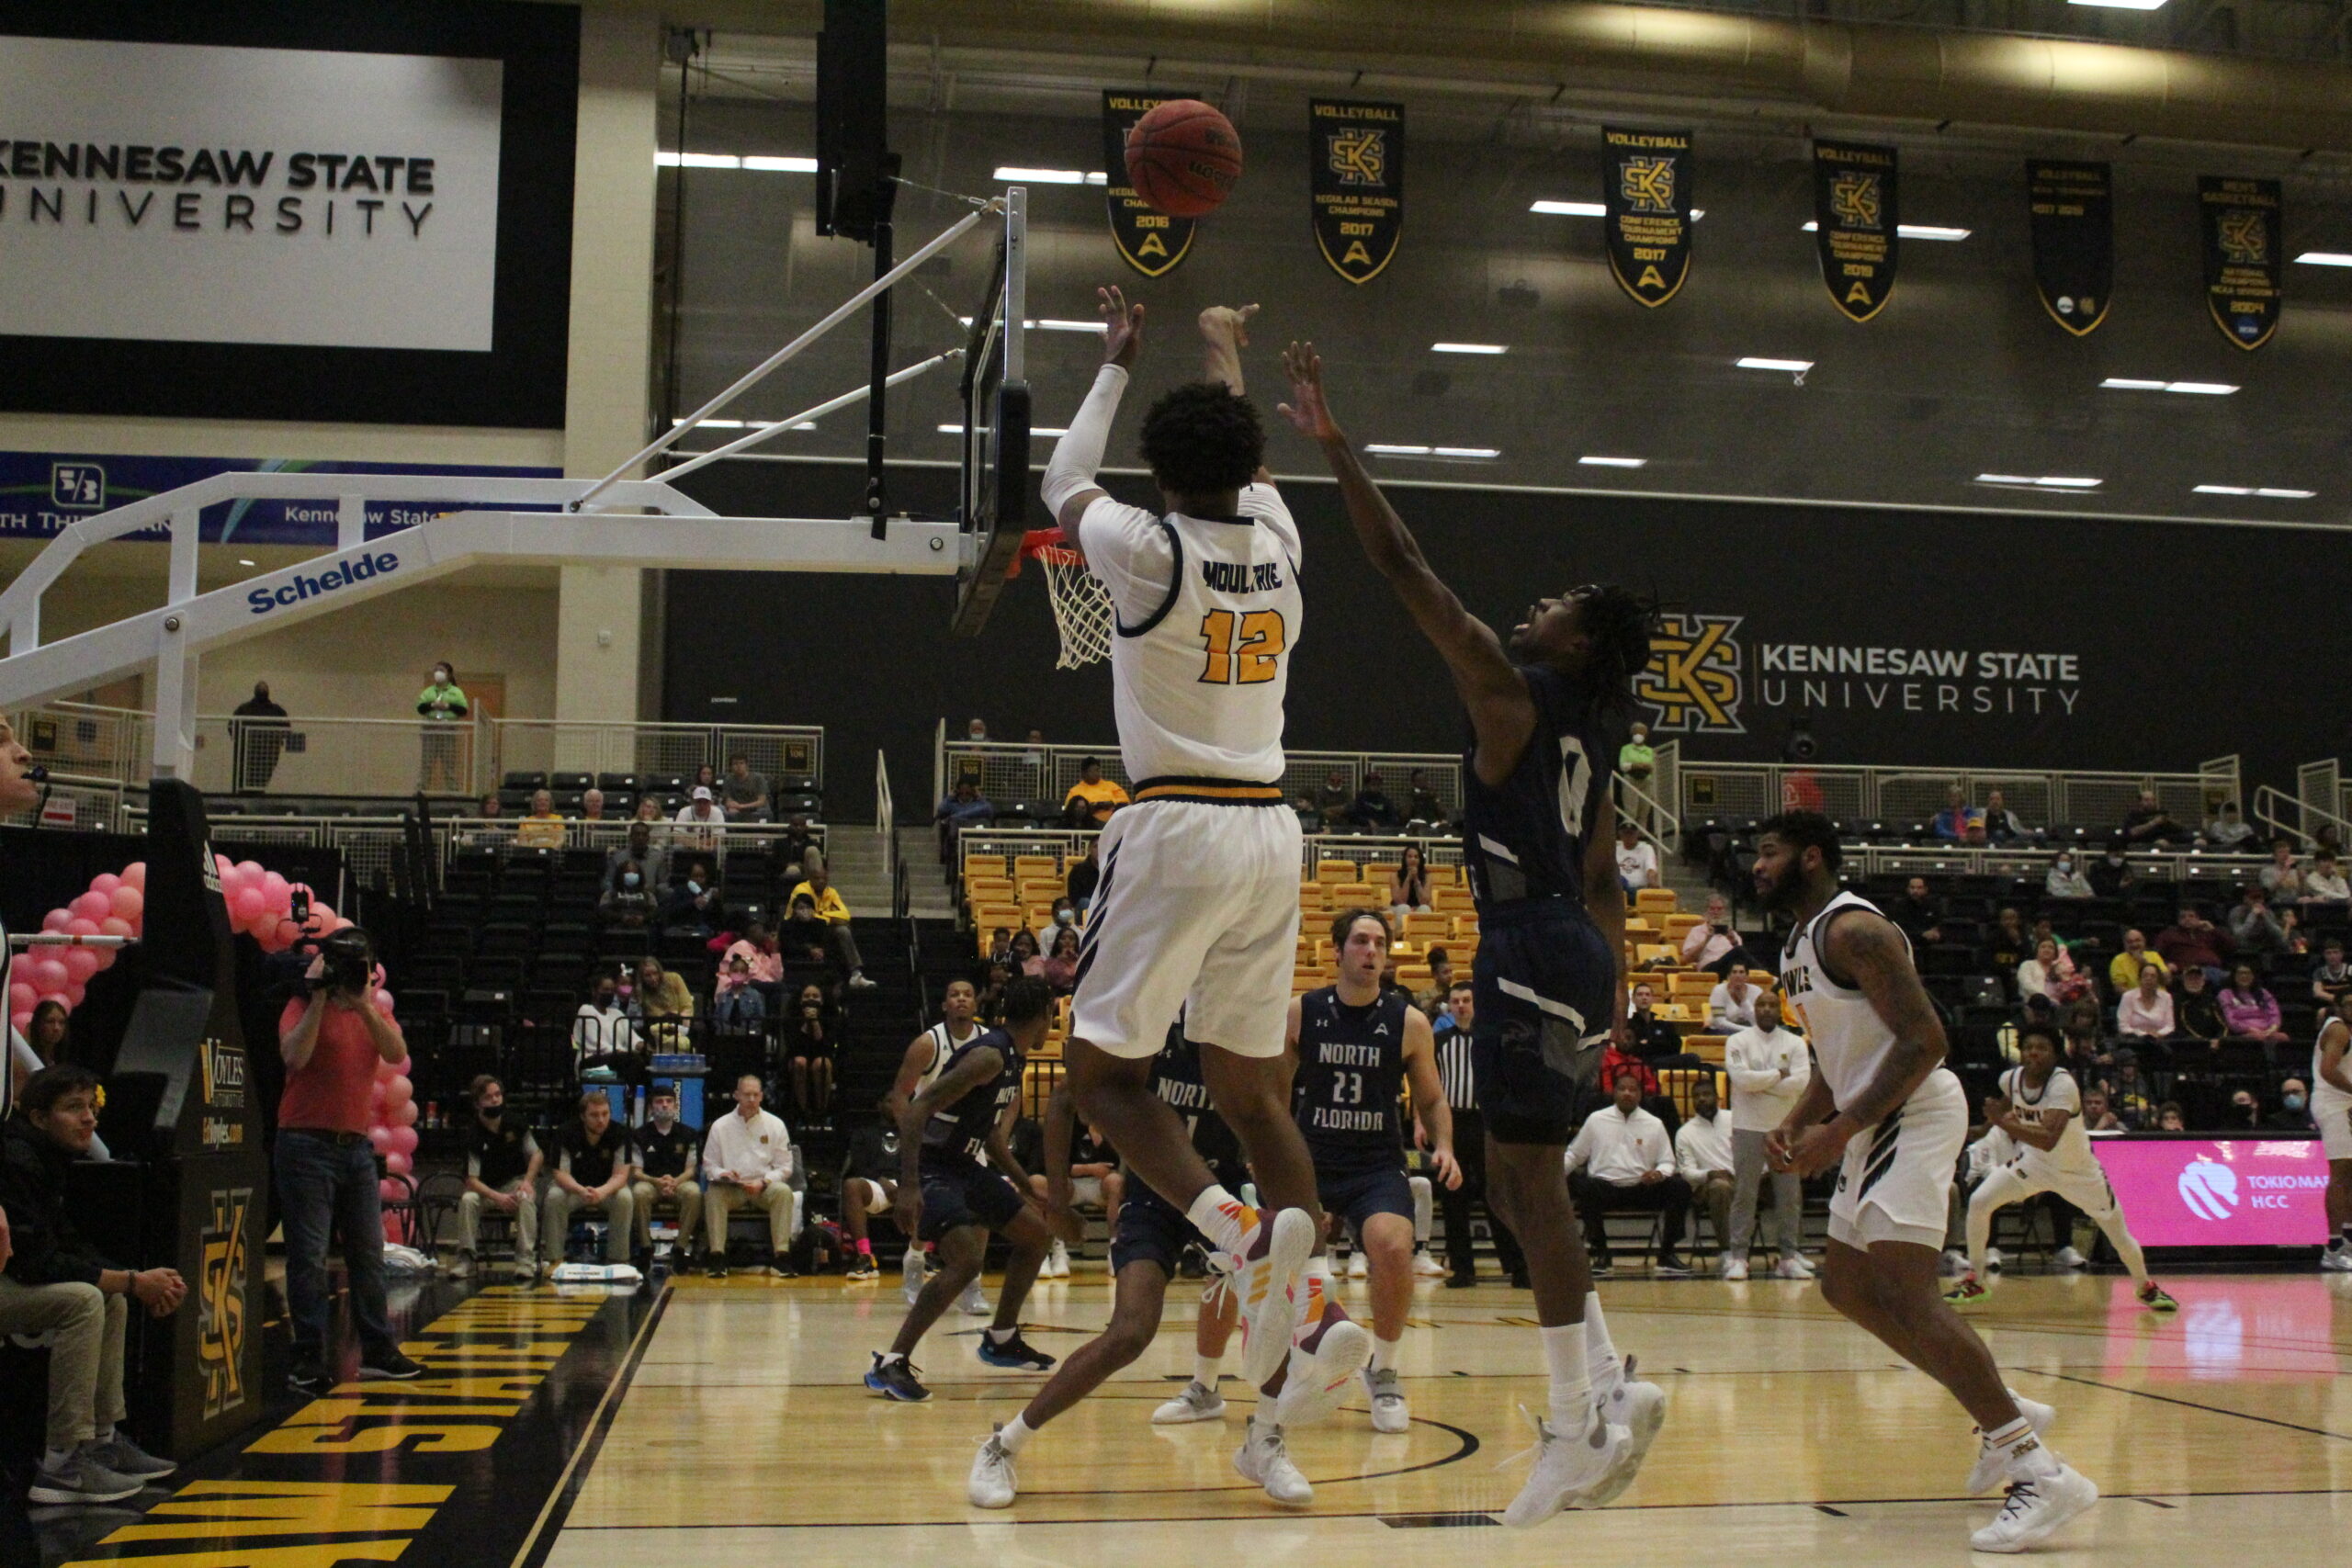 The Kennesaw State mens basketball team played against North Florida in a home game on Saturday, February 12th. Photo taken by Julia Walsh.